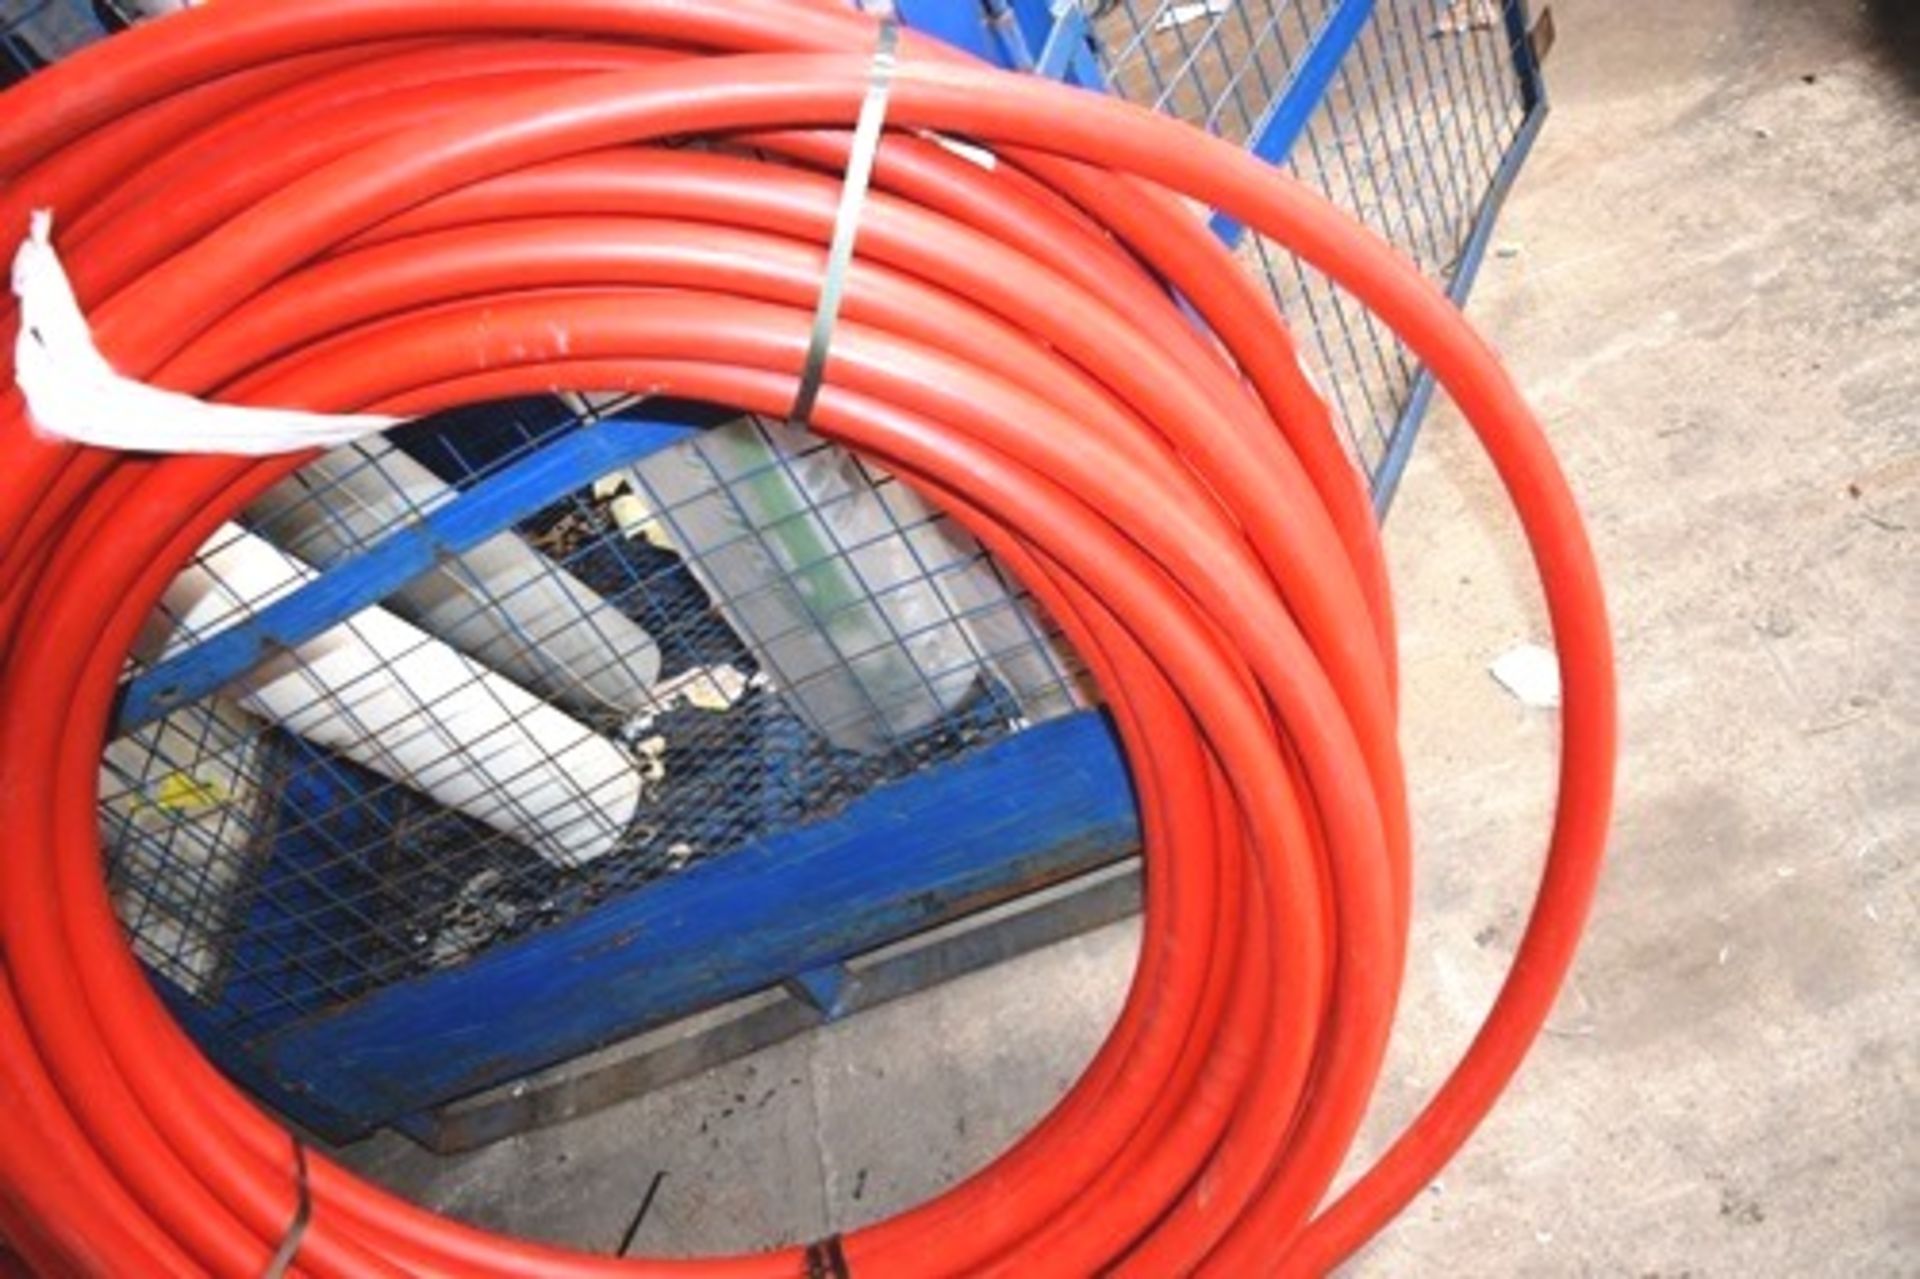 1 x length of red Emtelle 38 32 07, 02, 22 10754m electric cable duct - New (top shed) - Image 2 of 2